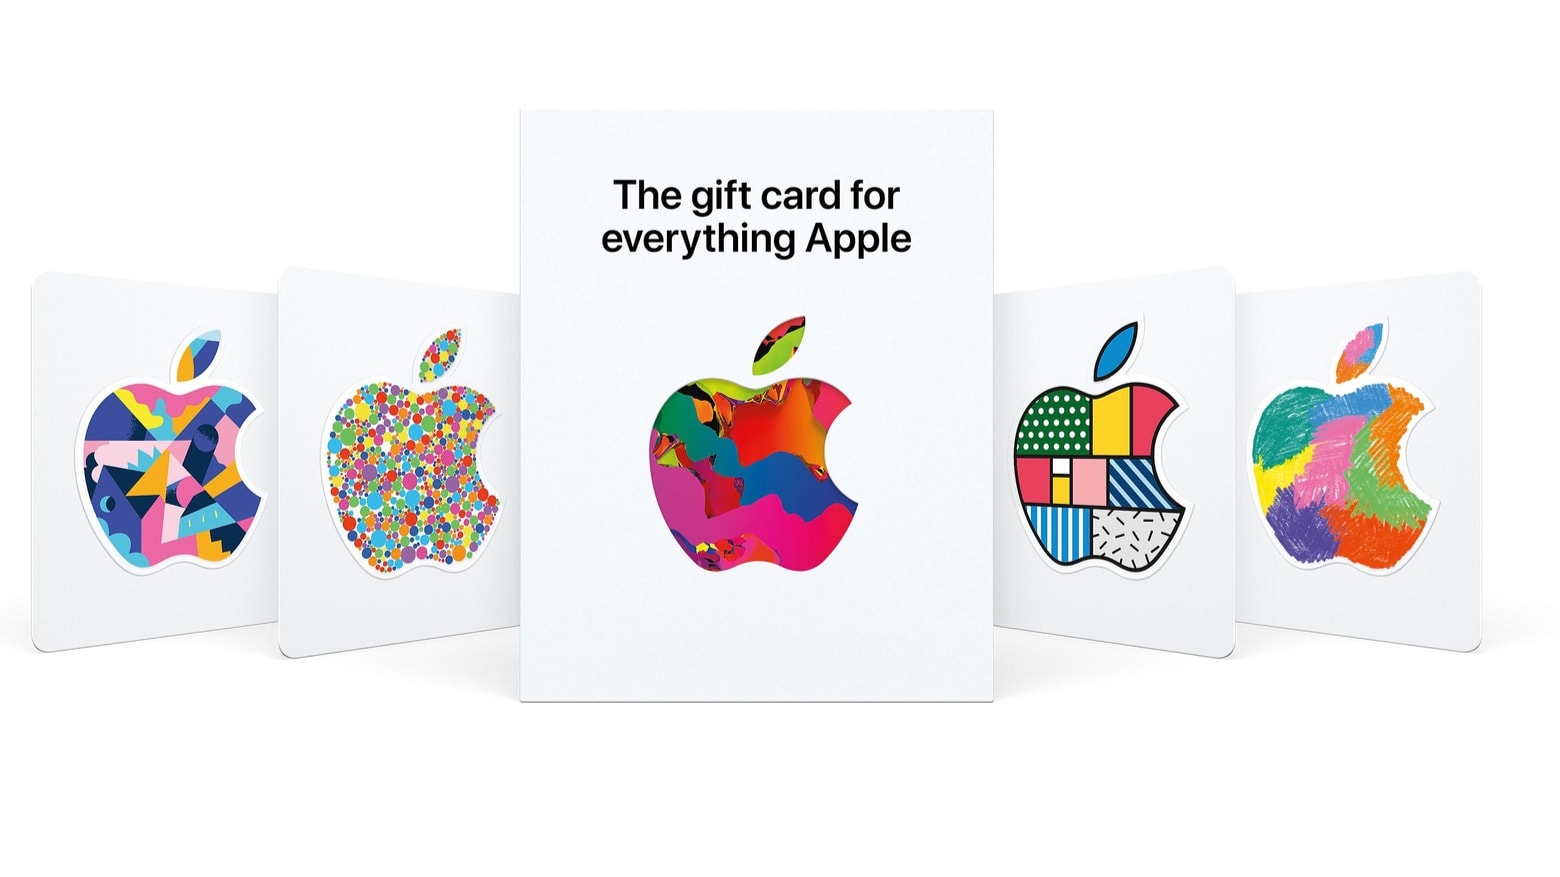 New allinone Apple gift card is ‘for everything and